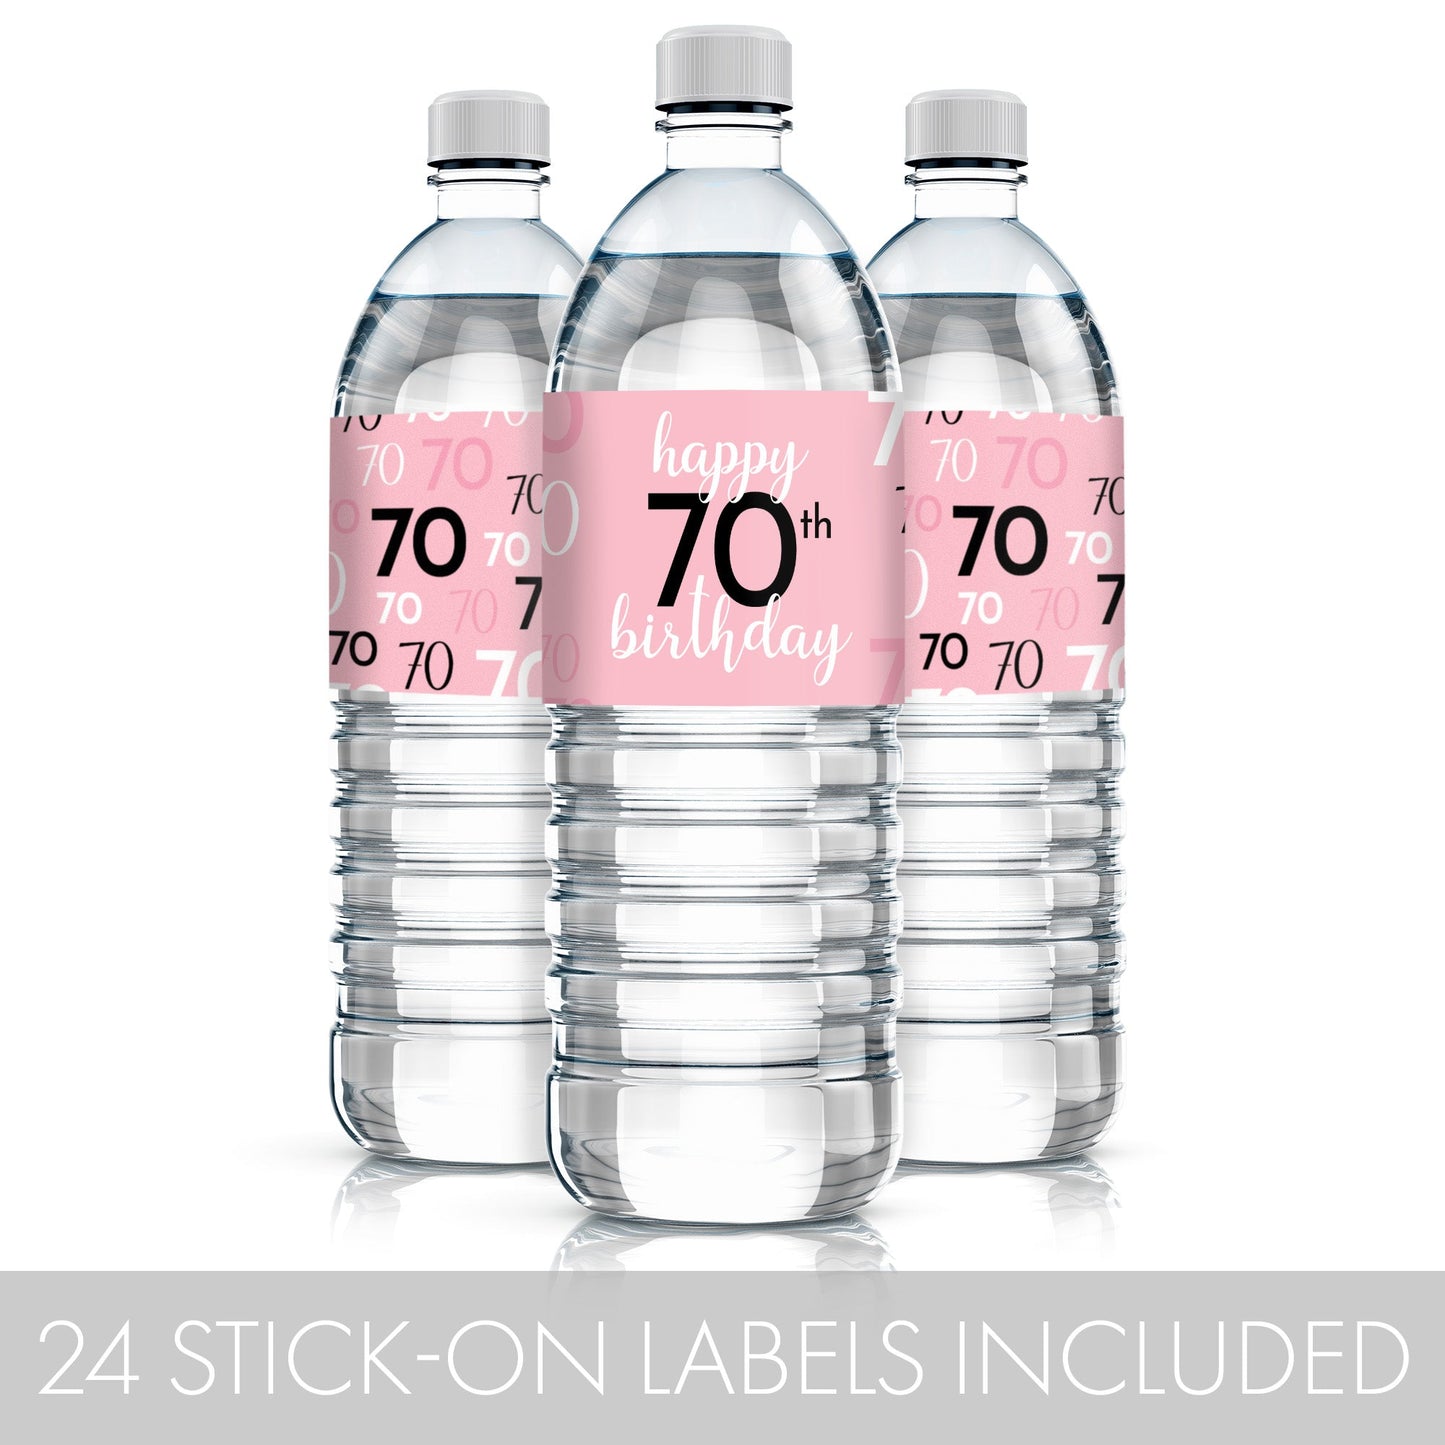 Eye-catching 70th birthday water bottle labels in pink and black with easy peel-and-stick application